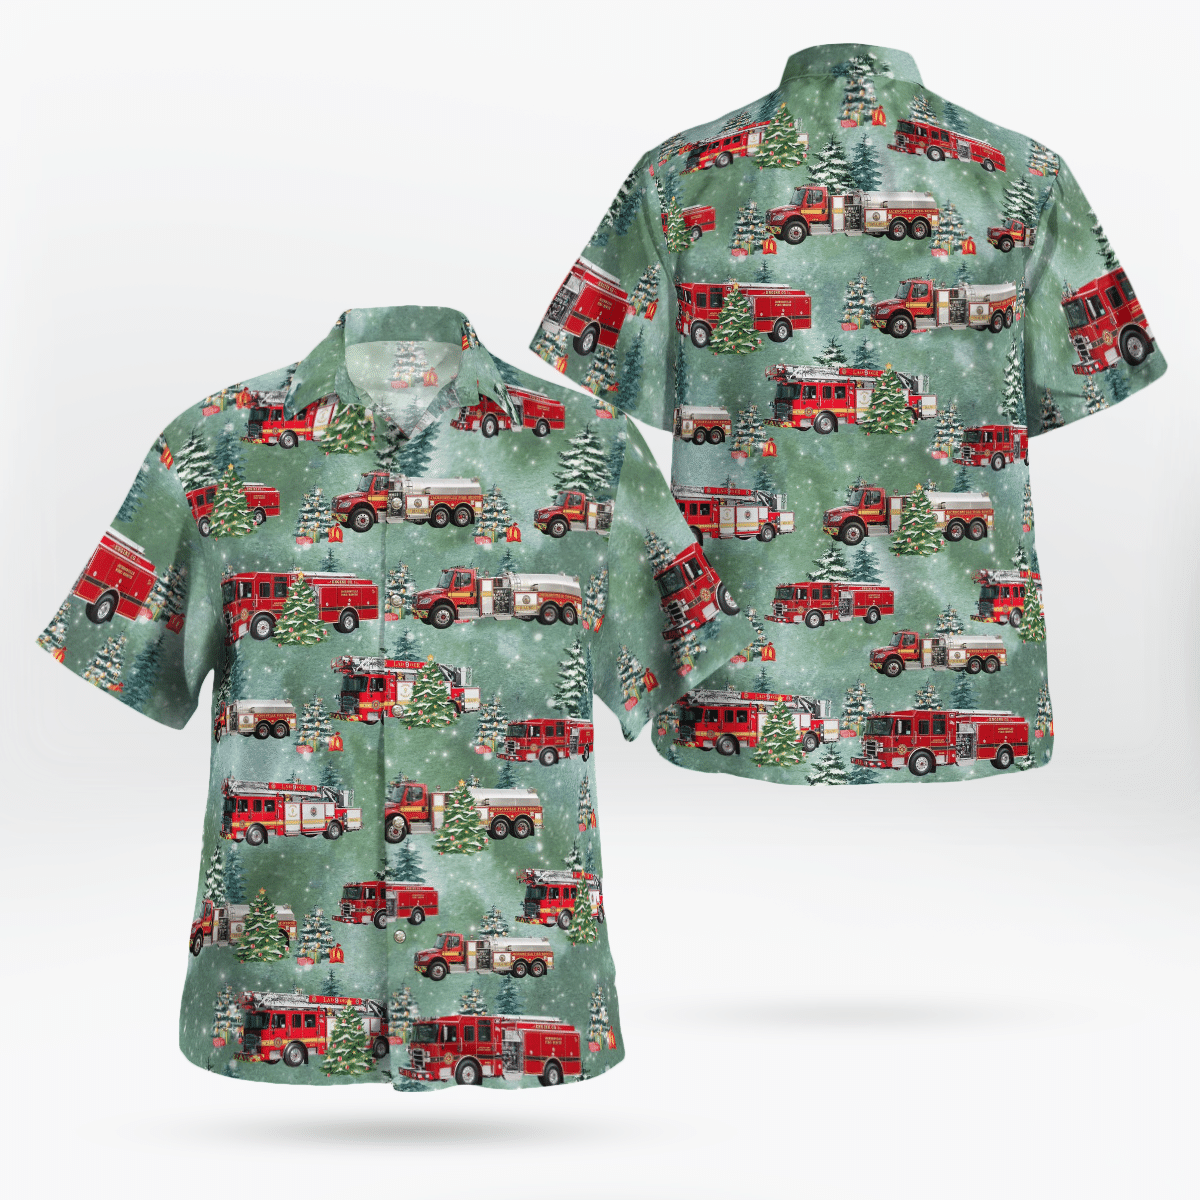 If You Are In The Market For A New Aloha Shirt, Look No Further Than Our Store Word1